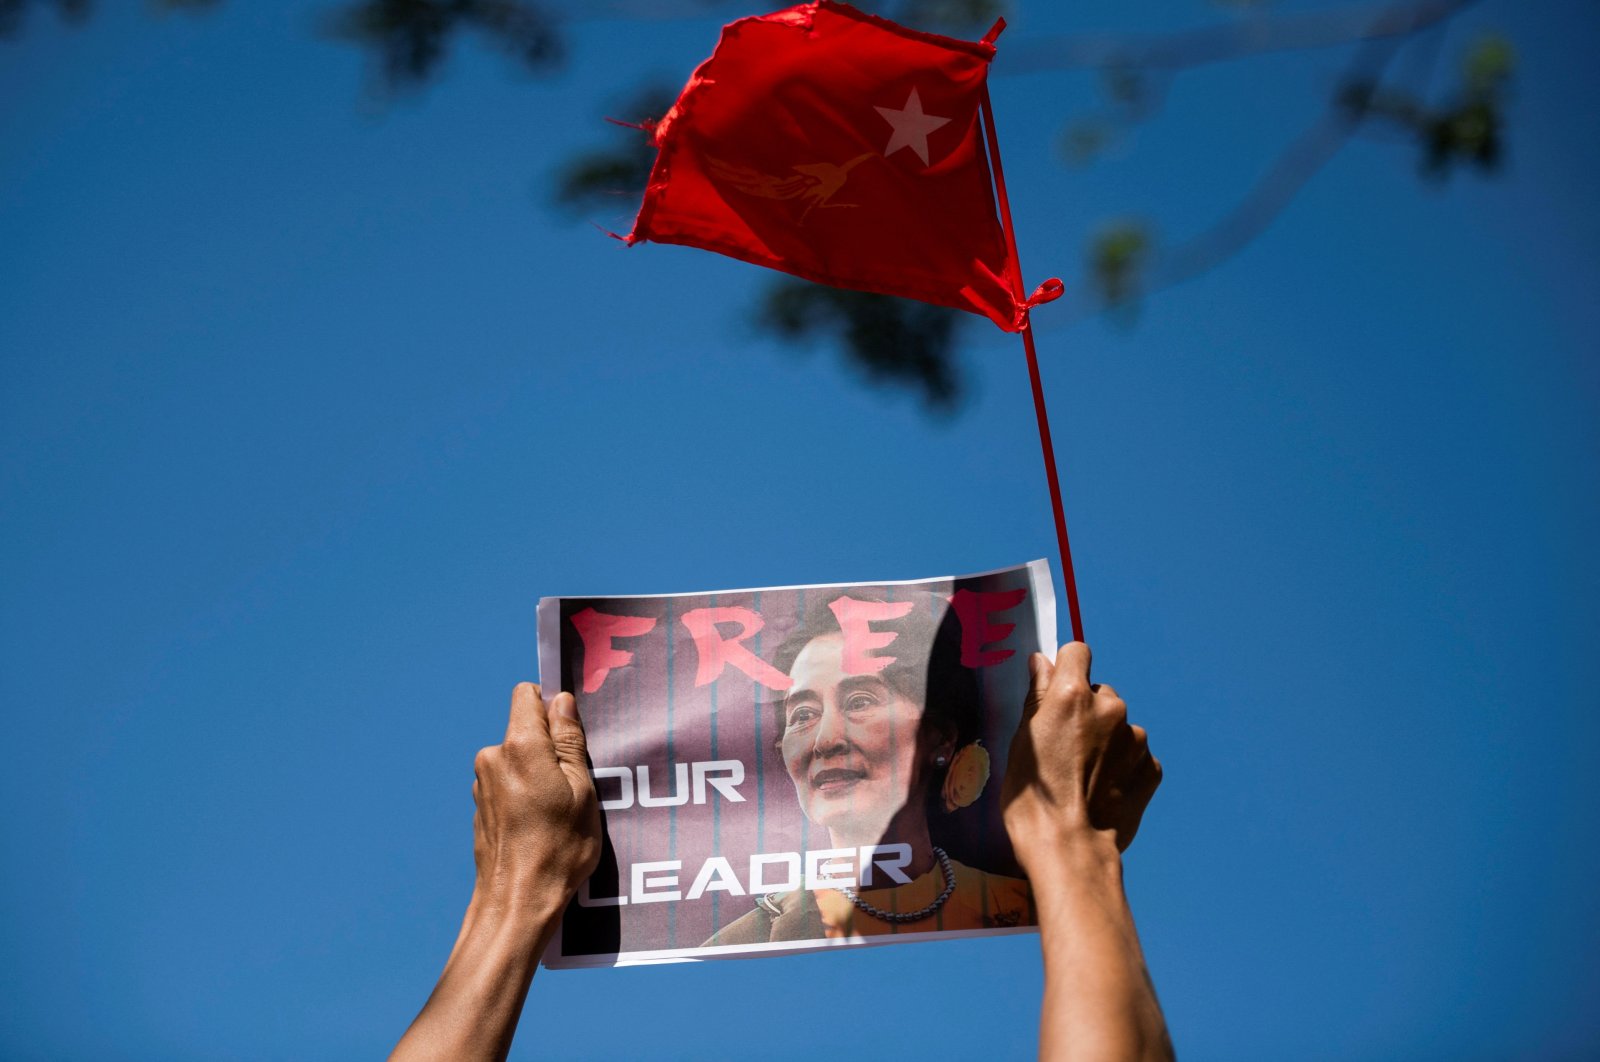 A demonstrator holds up a placard demanding the release of Aung San Suu Kyi, in Yangon, Myanmar, Feb. 11, 2021. (Reuters Photo)